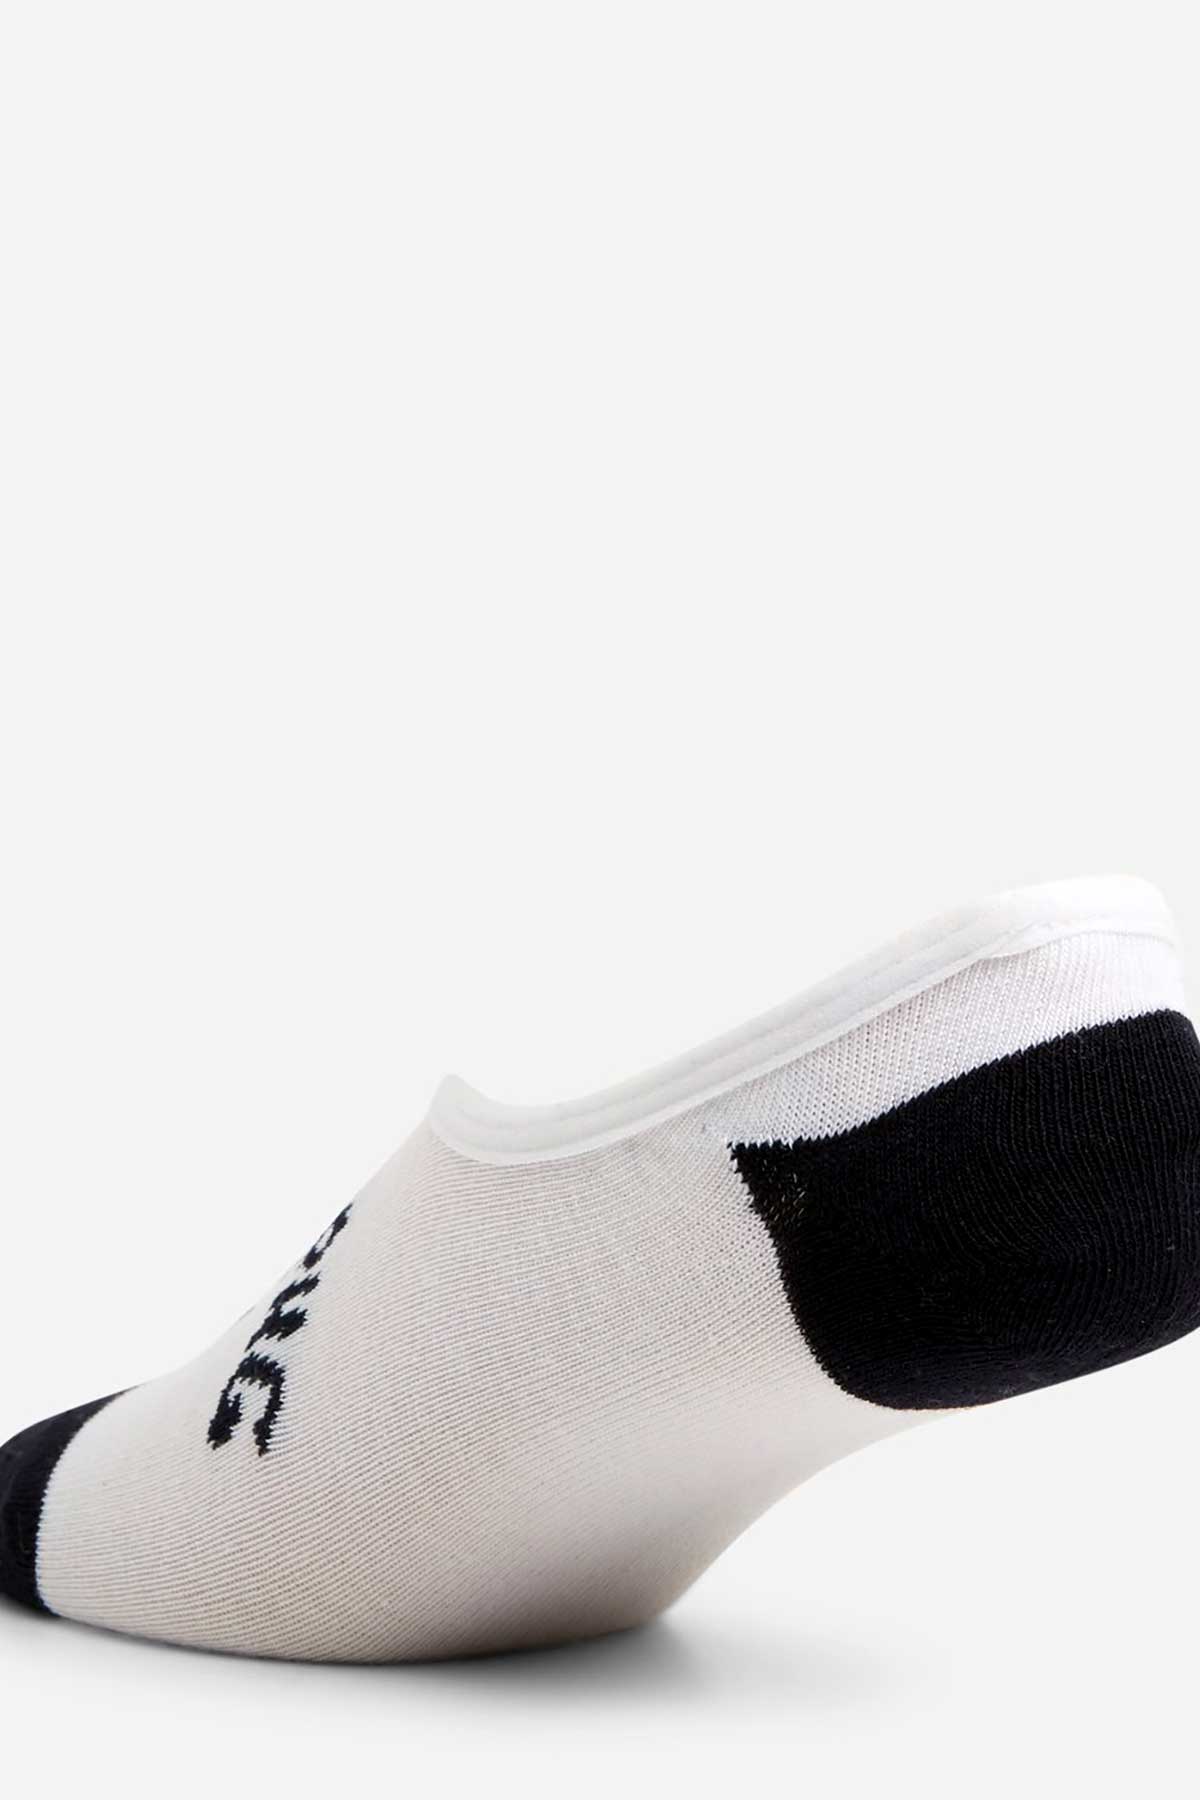 Billabong Invisible Socks 5 Pack, Back View White and Black.